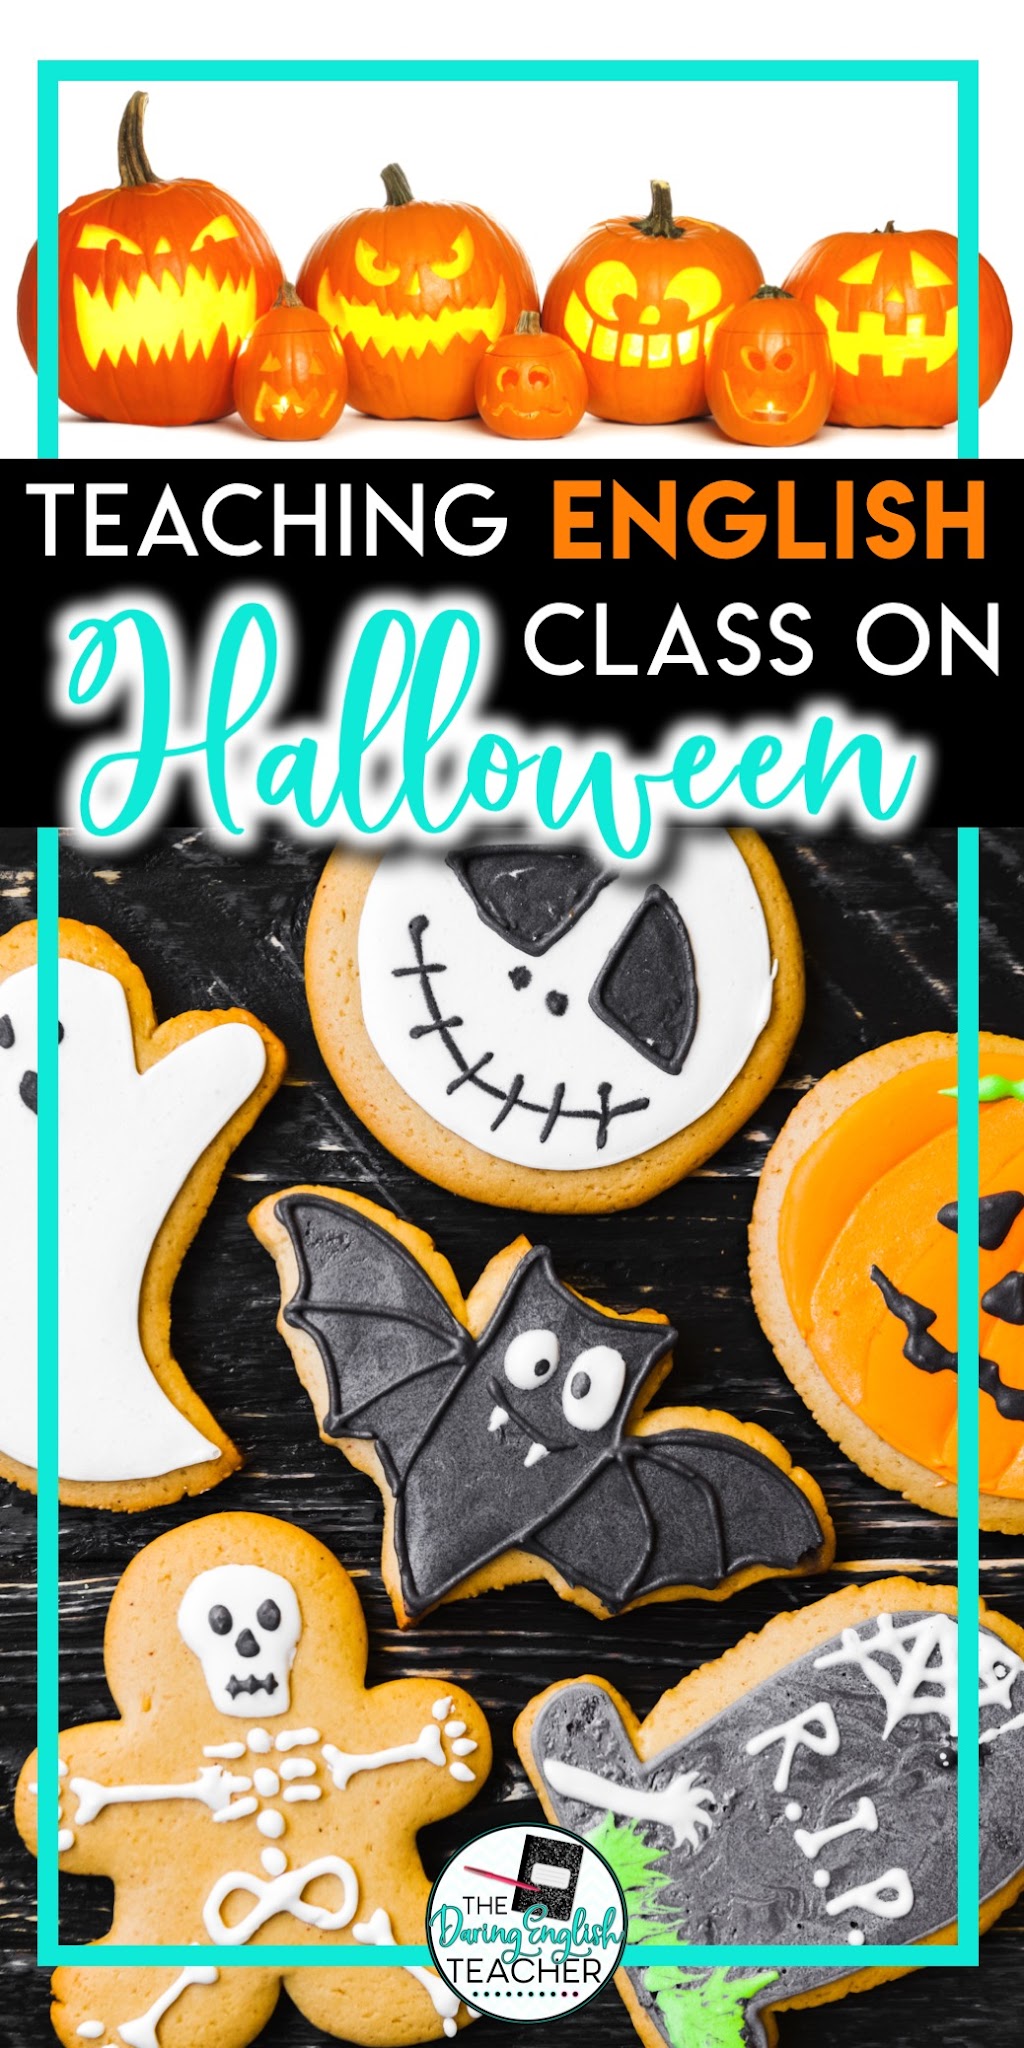 Teaching on Halloween: How to Survive the Secondary ELA Classroom